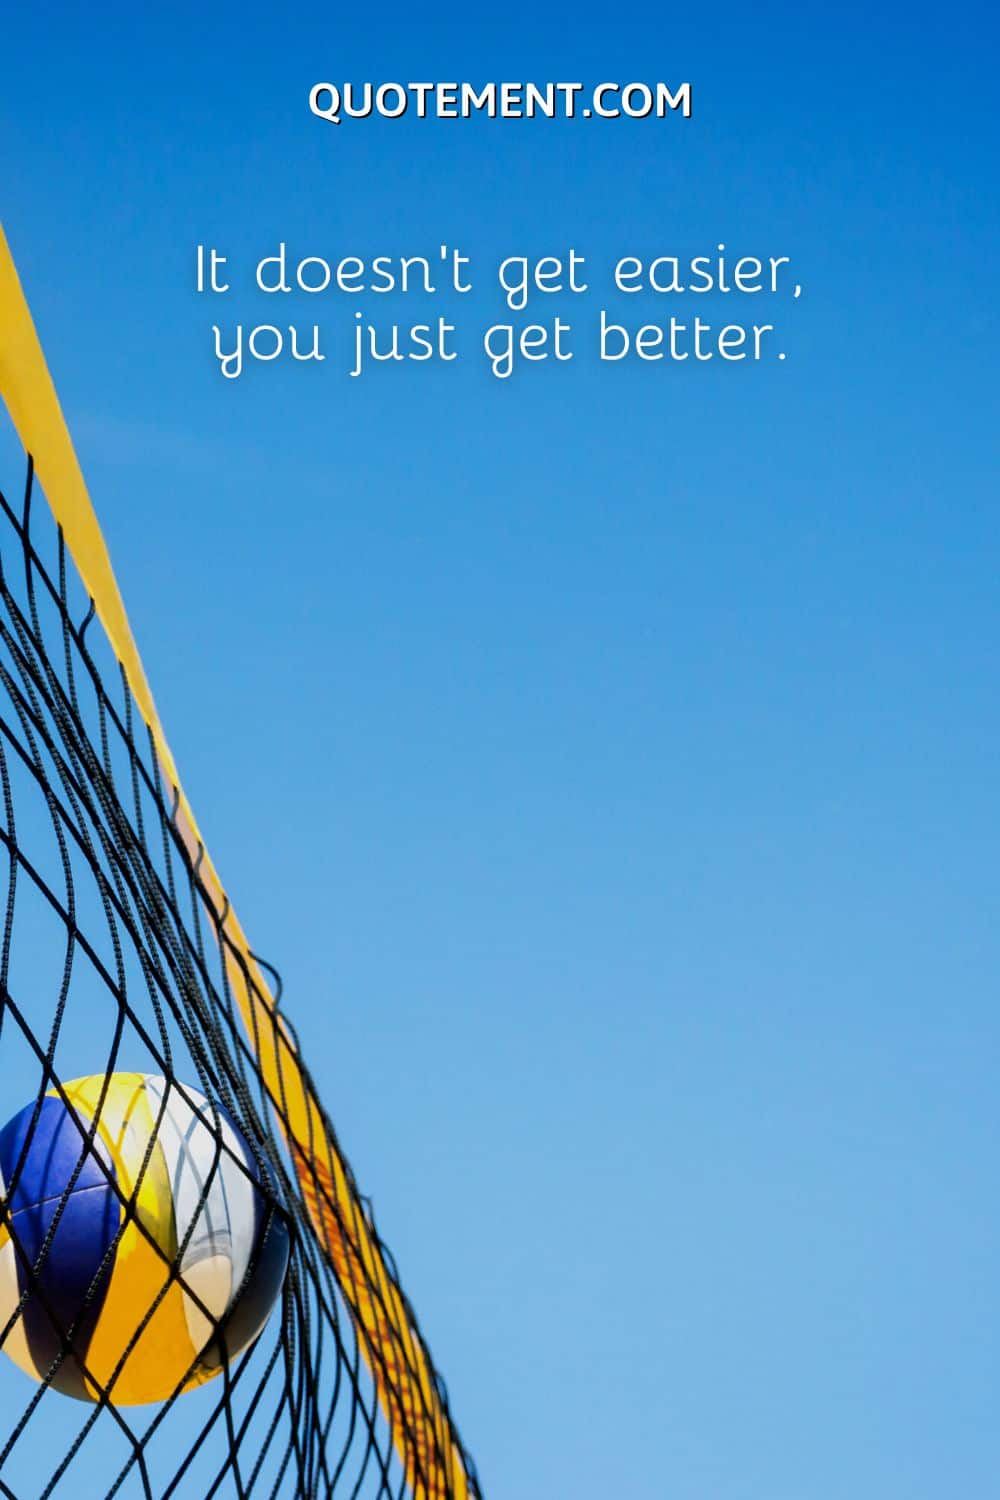 It doesn’t get easier, you just get better.